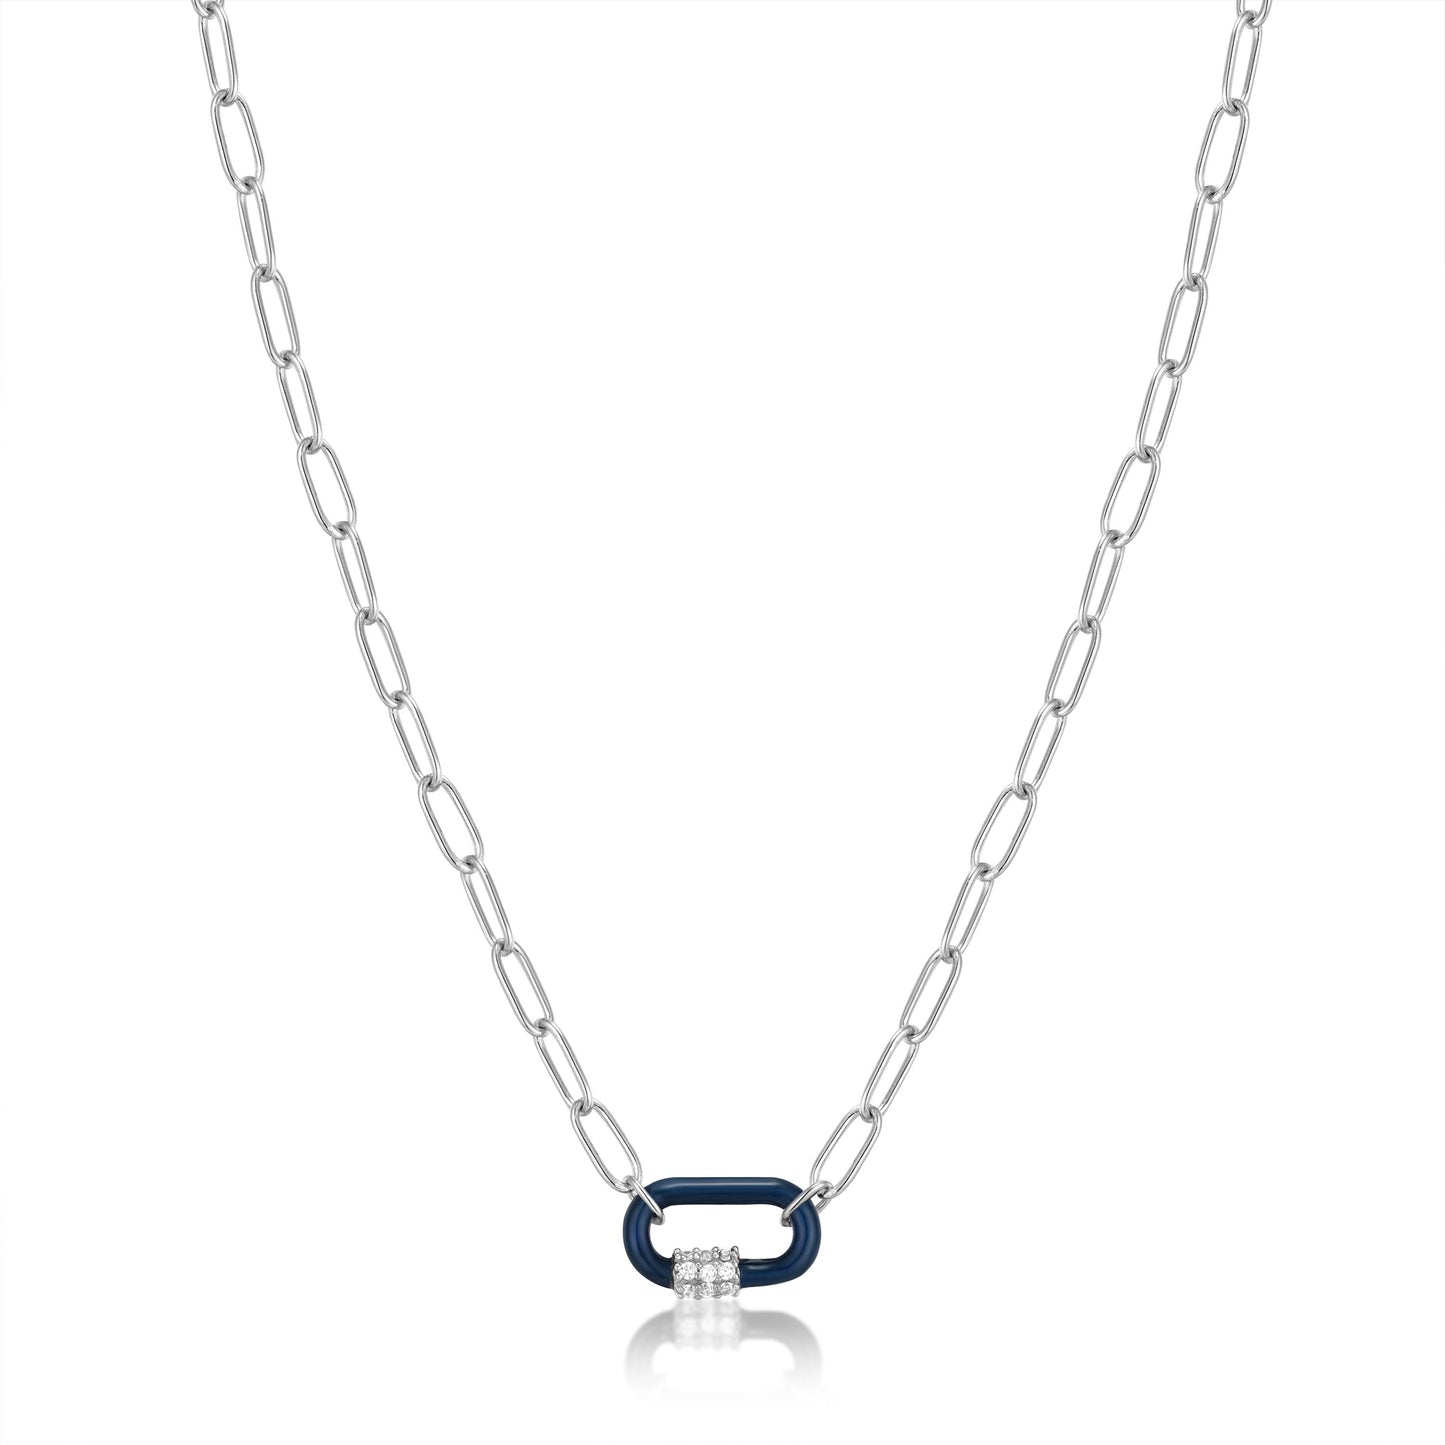 ANIA HAIE ANIA HAIE - Navy Blue Enamel Carabiner Silver Necklace available at The Good Life Boutique